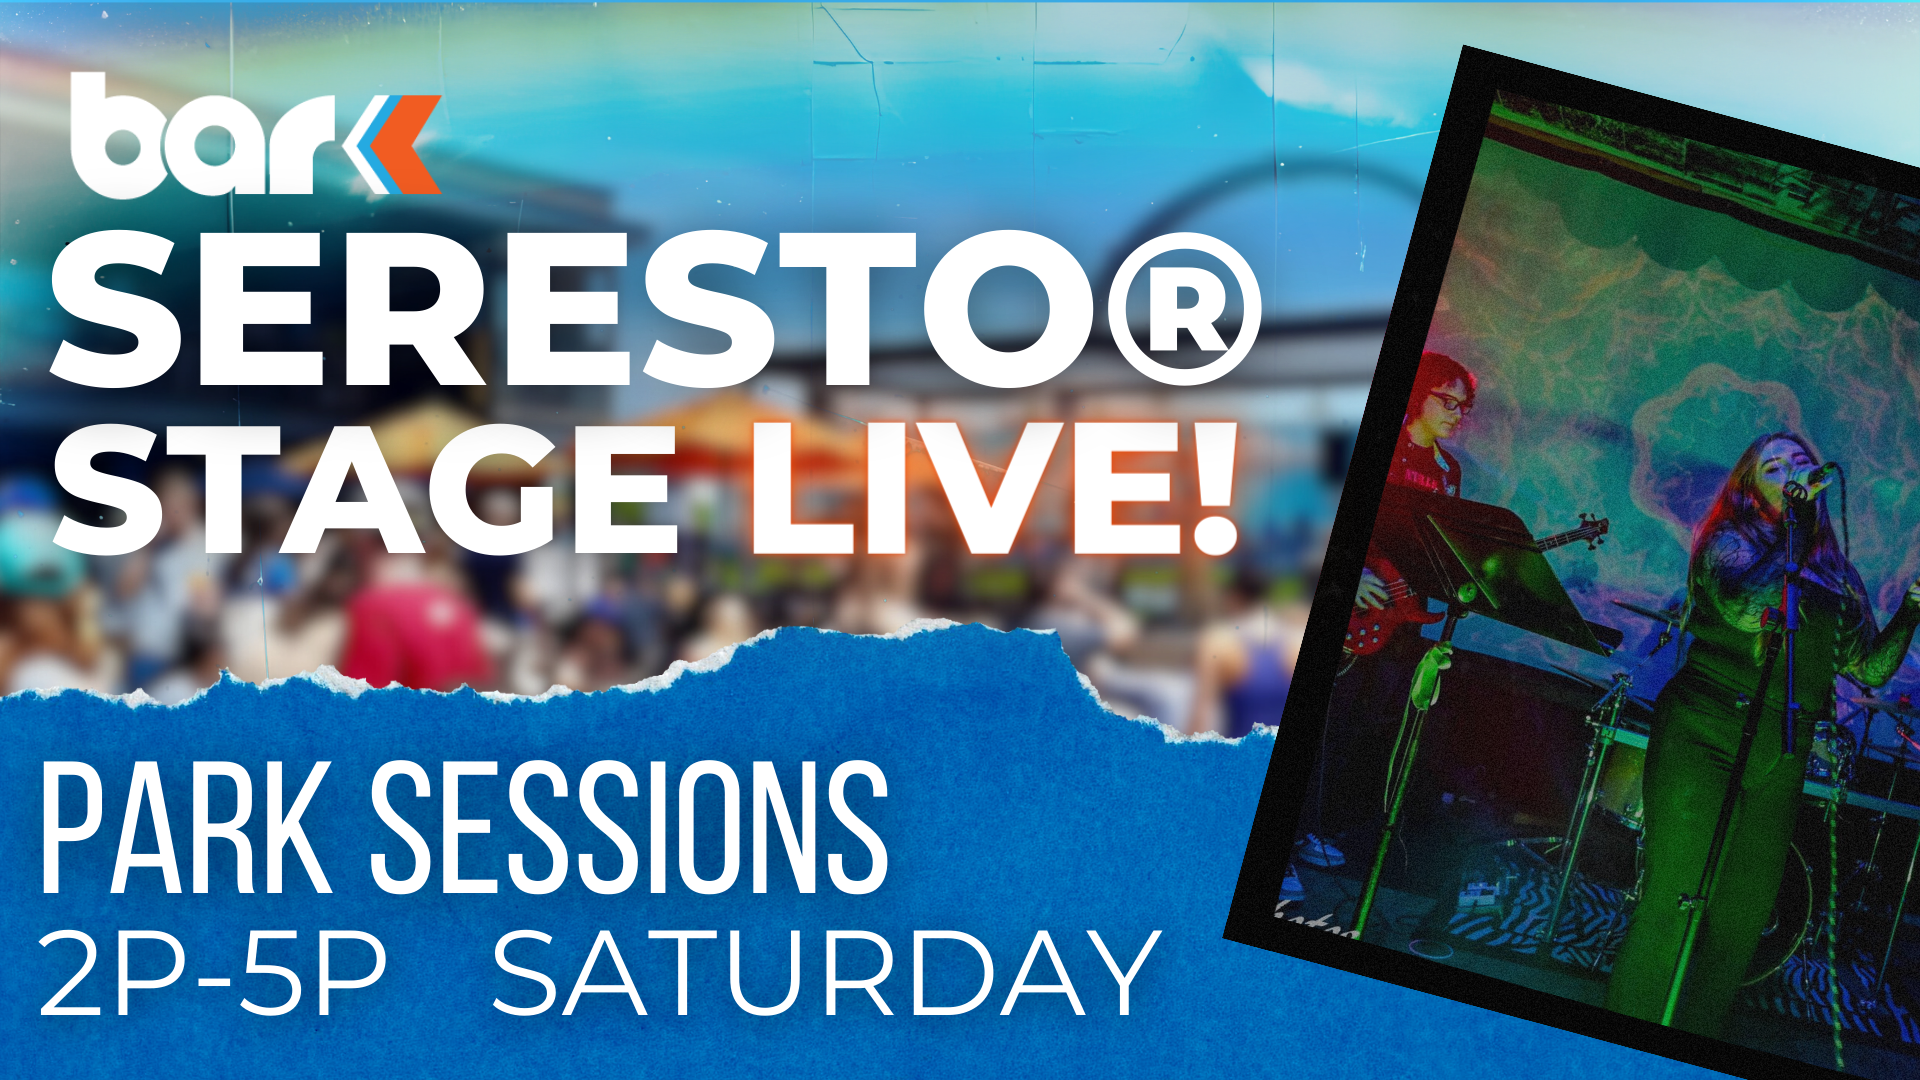 Bar K Seresto Stage Live. Park Sessions 2 to 5 pm saturday.